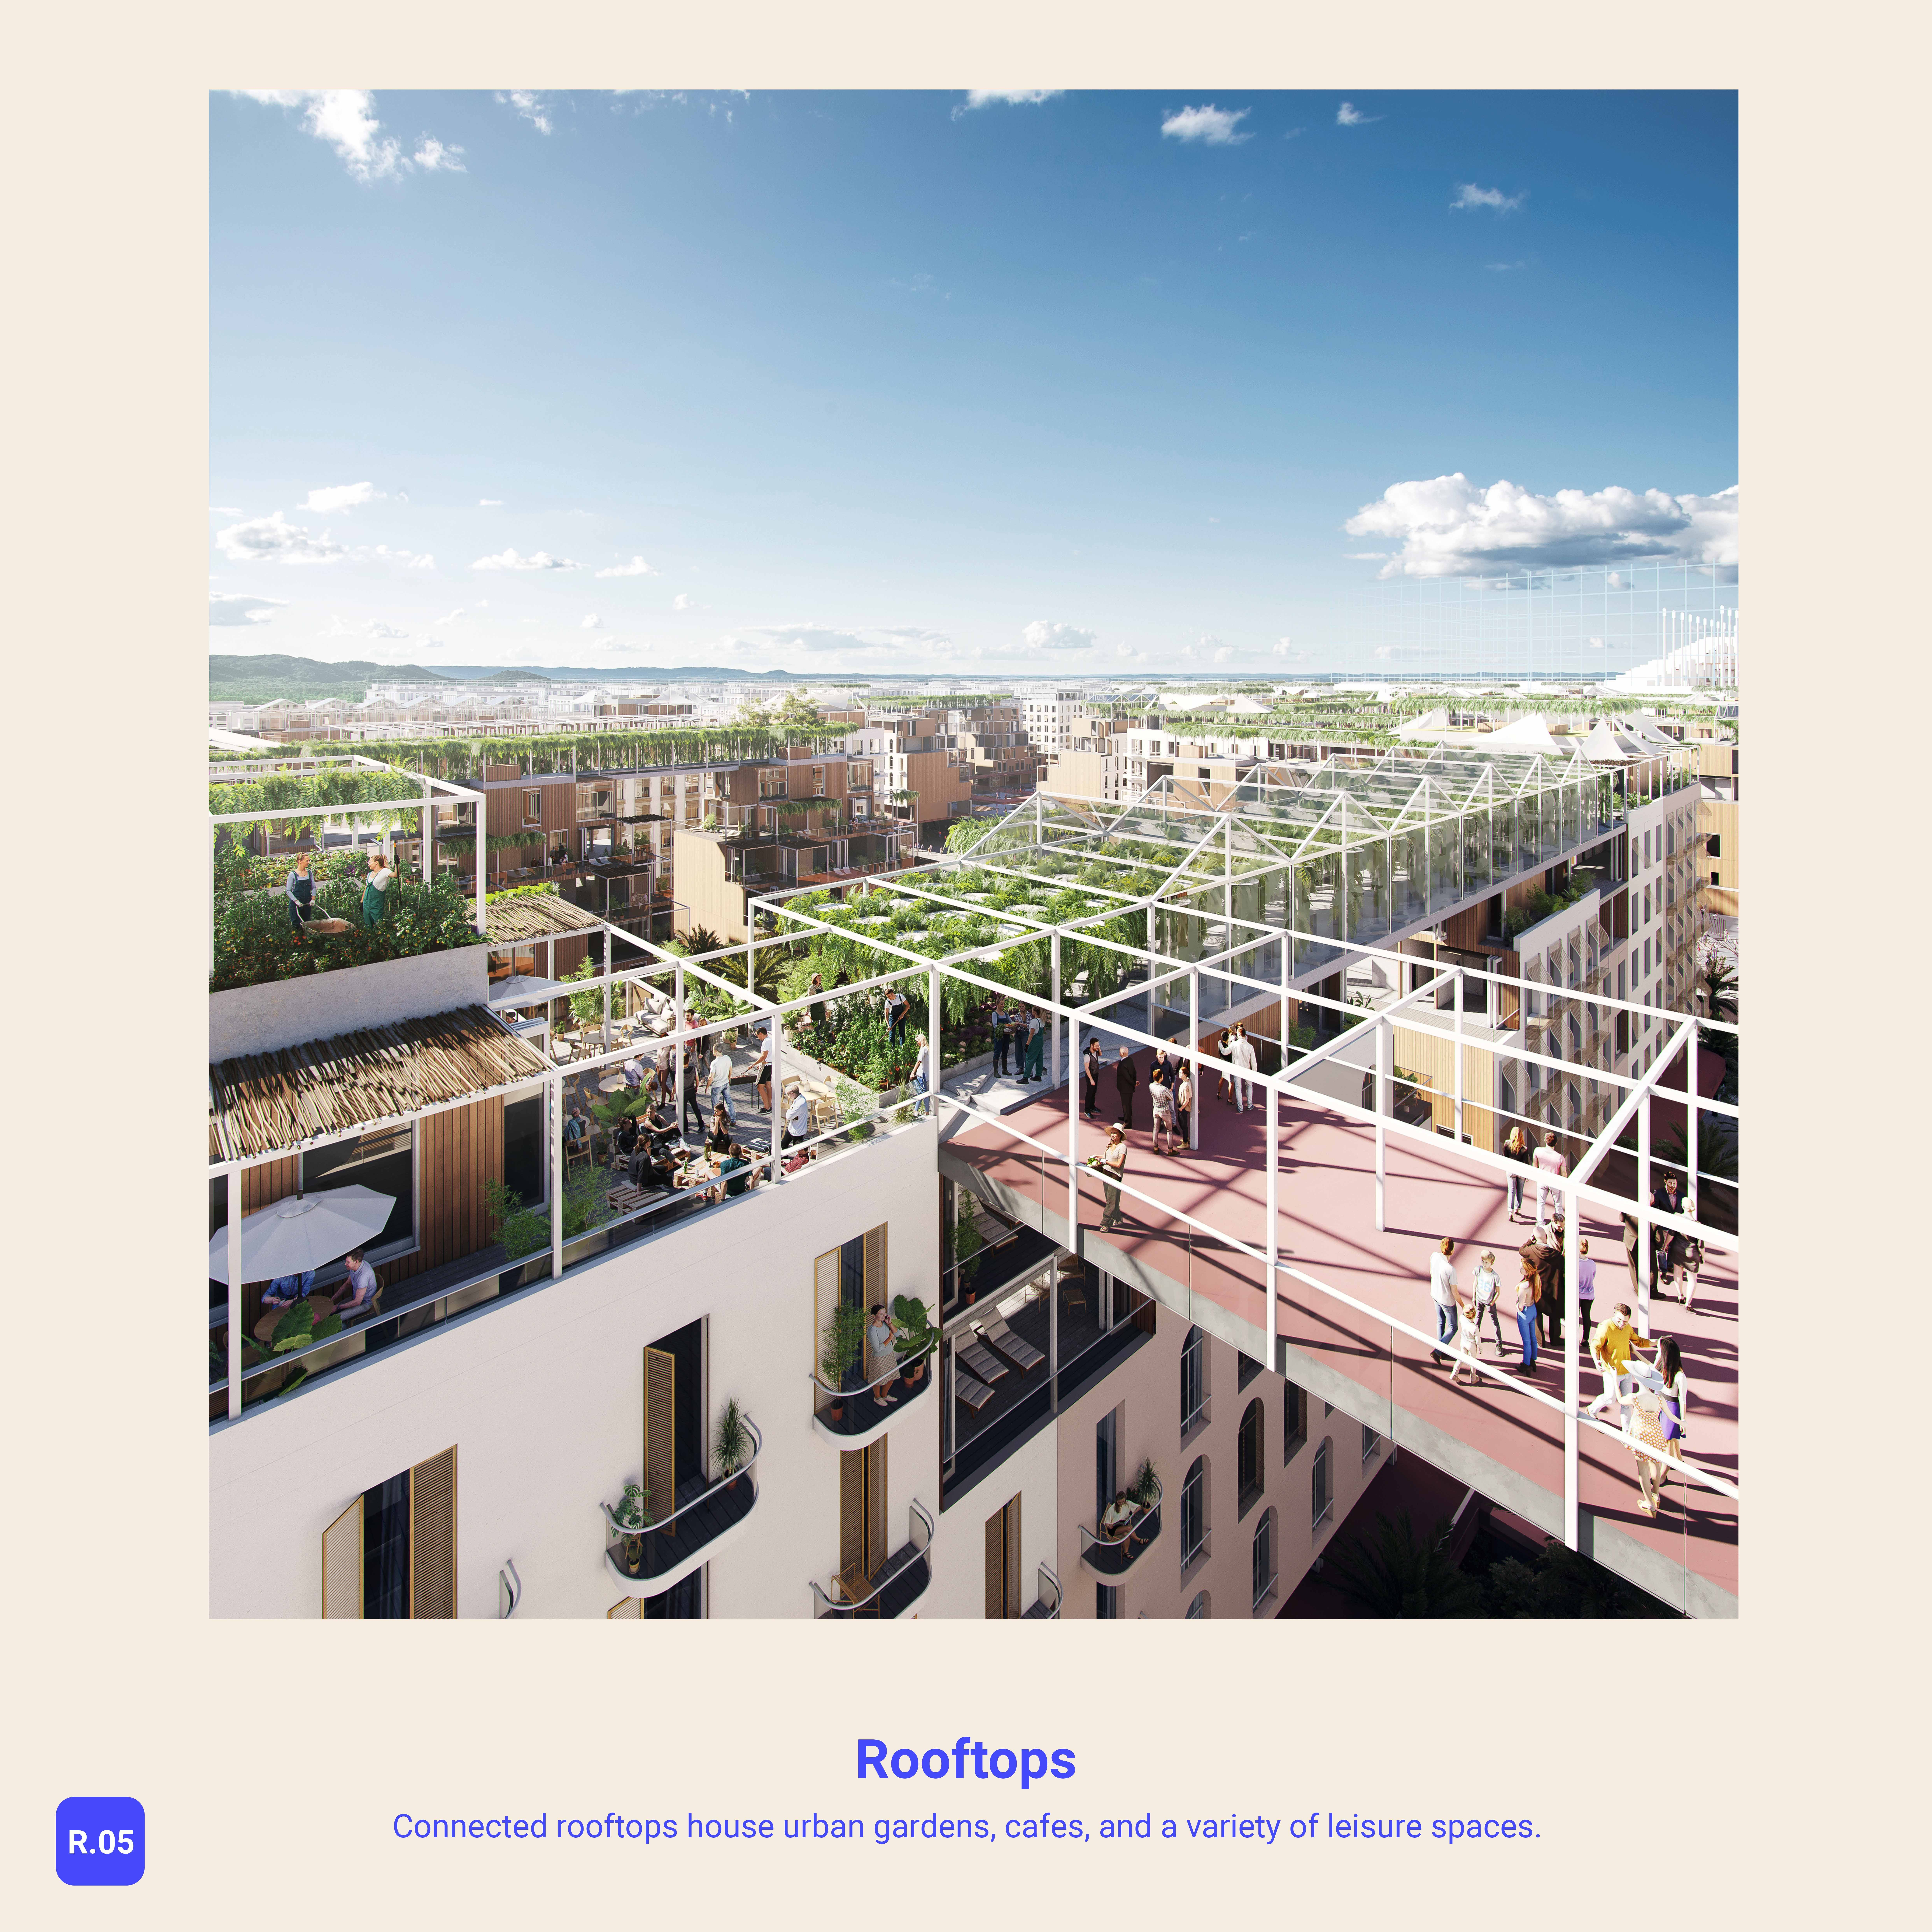 The rooftop of a city block with an interior courtyard. On the rooftop, there is a cafe, garden for growing produce, and connecting bridges to the rooftops of other city blocks. People are walking around and sitting. The sky is blue and the sun is strong.